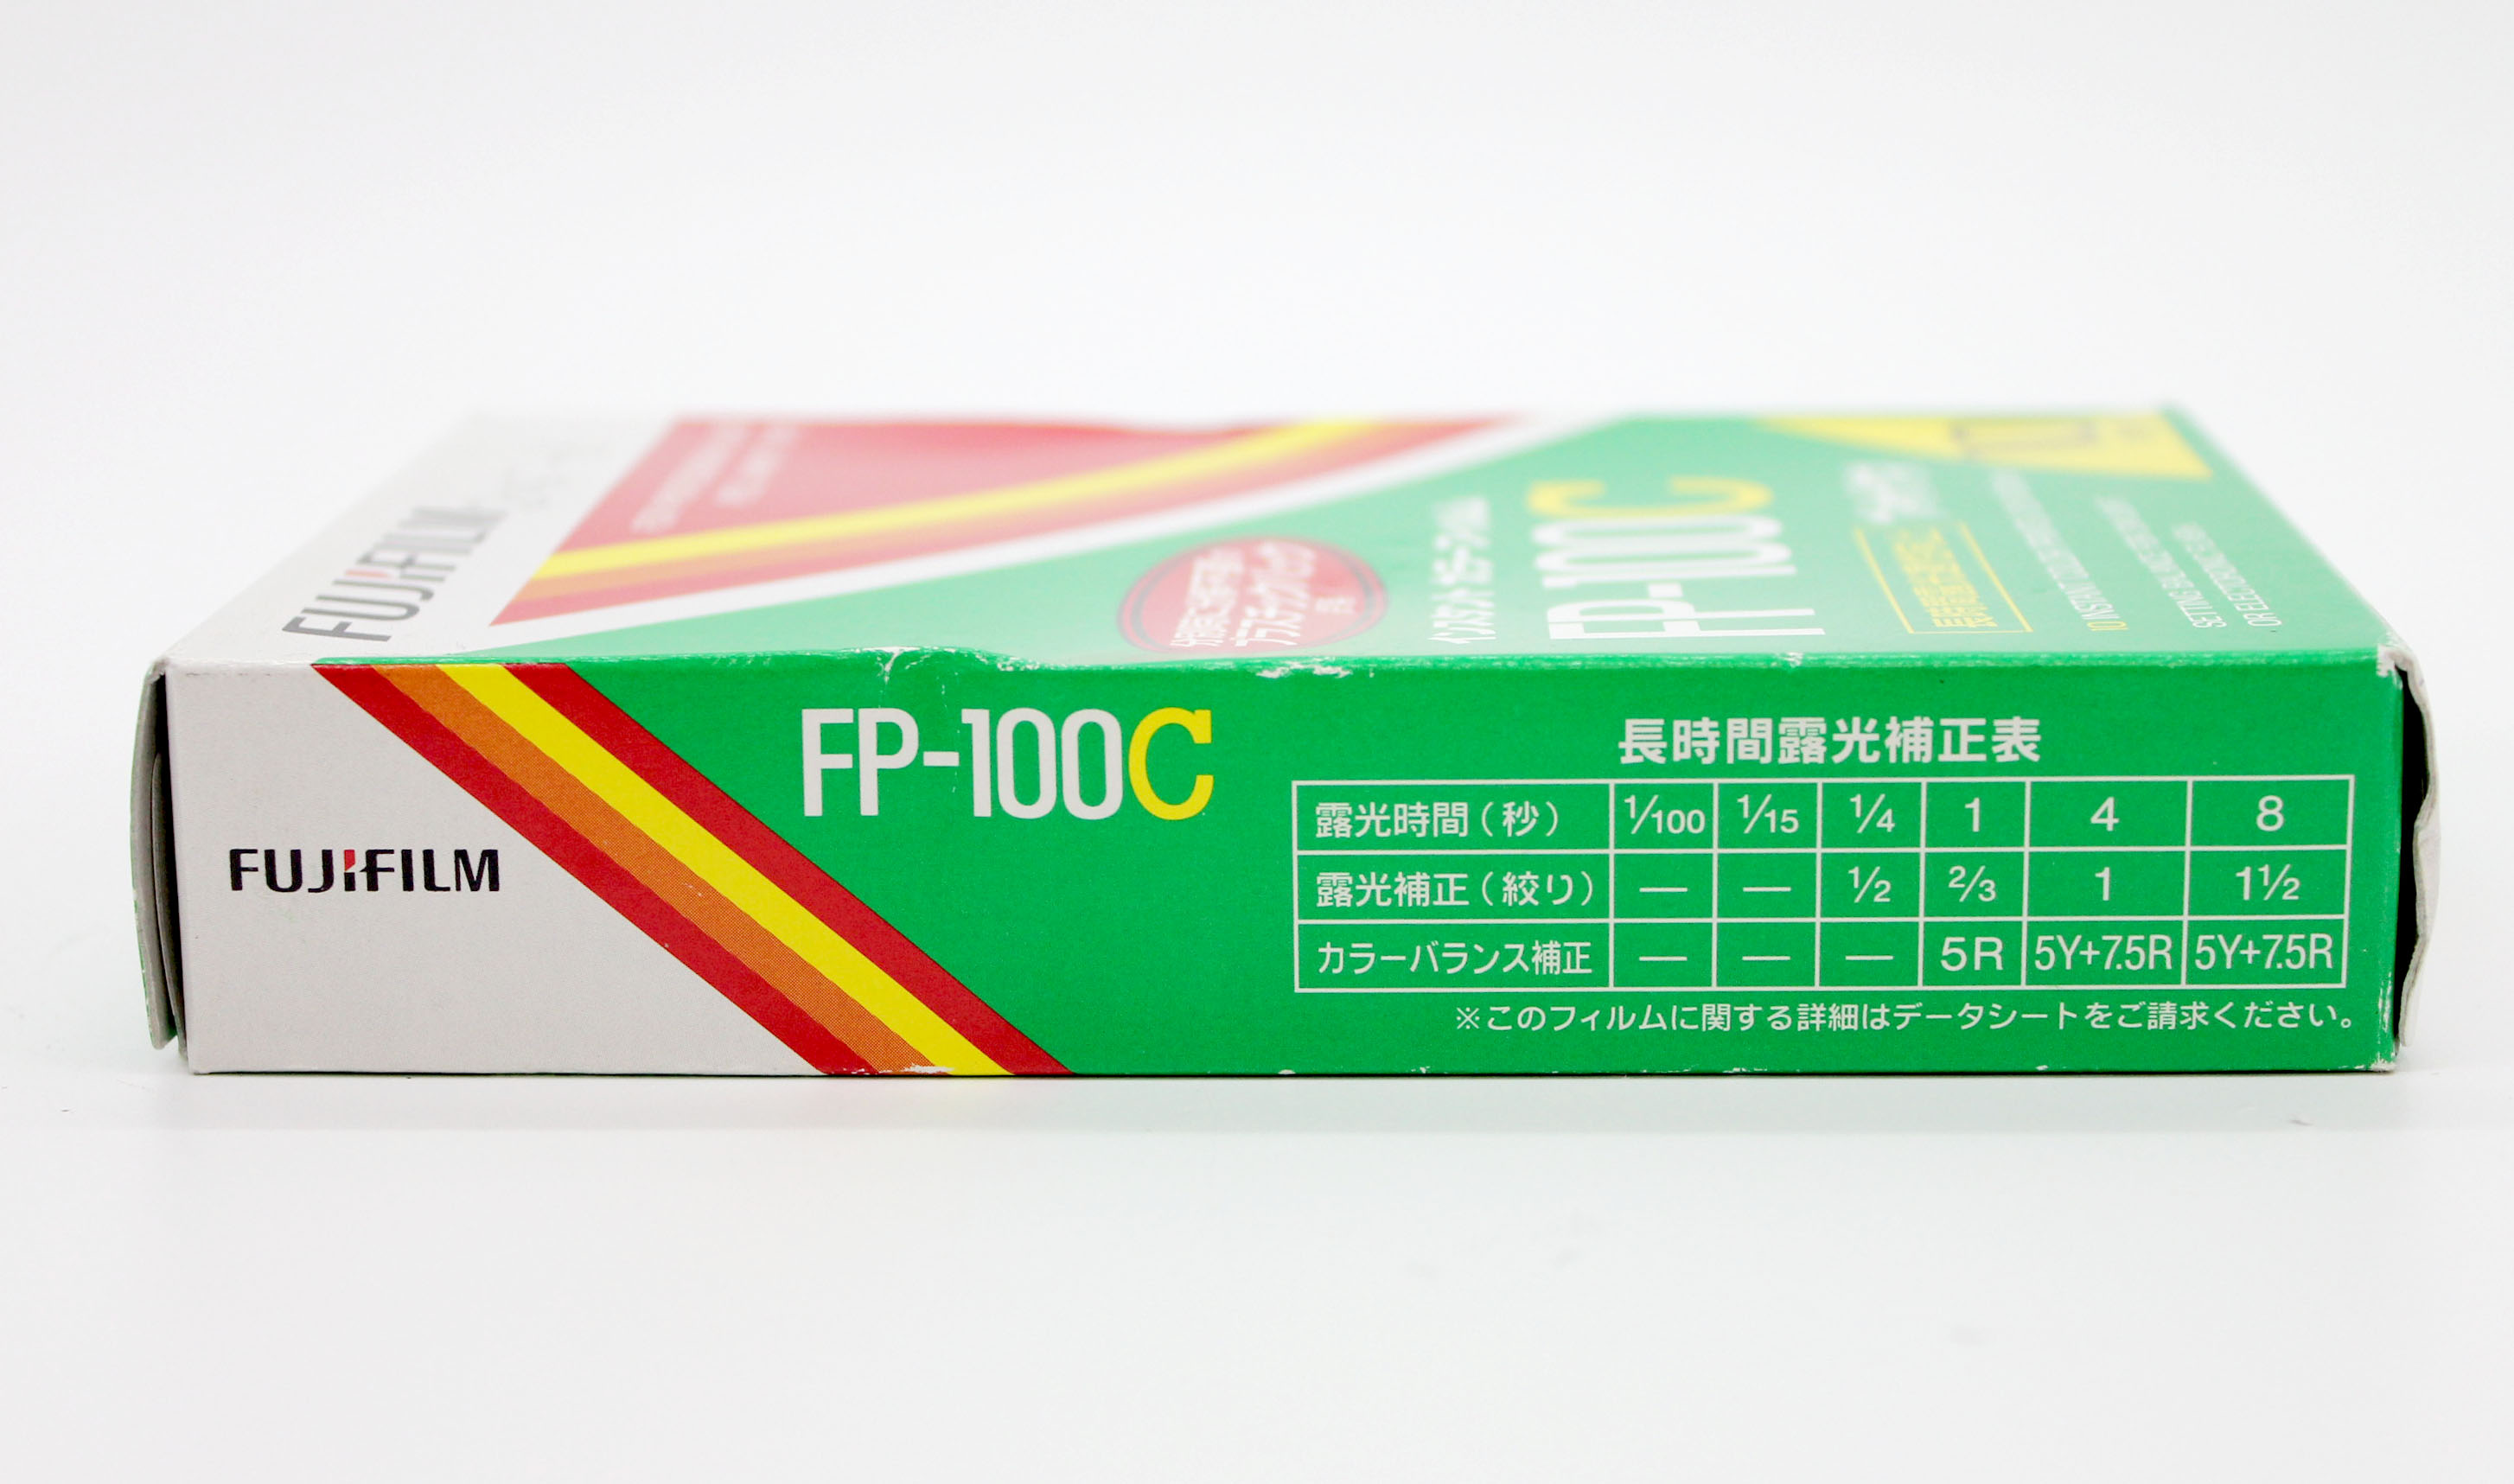  Fujifilm FP-100C Professional Instant Color Film (Expired 6/2015) from Japan Photo 4